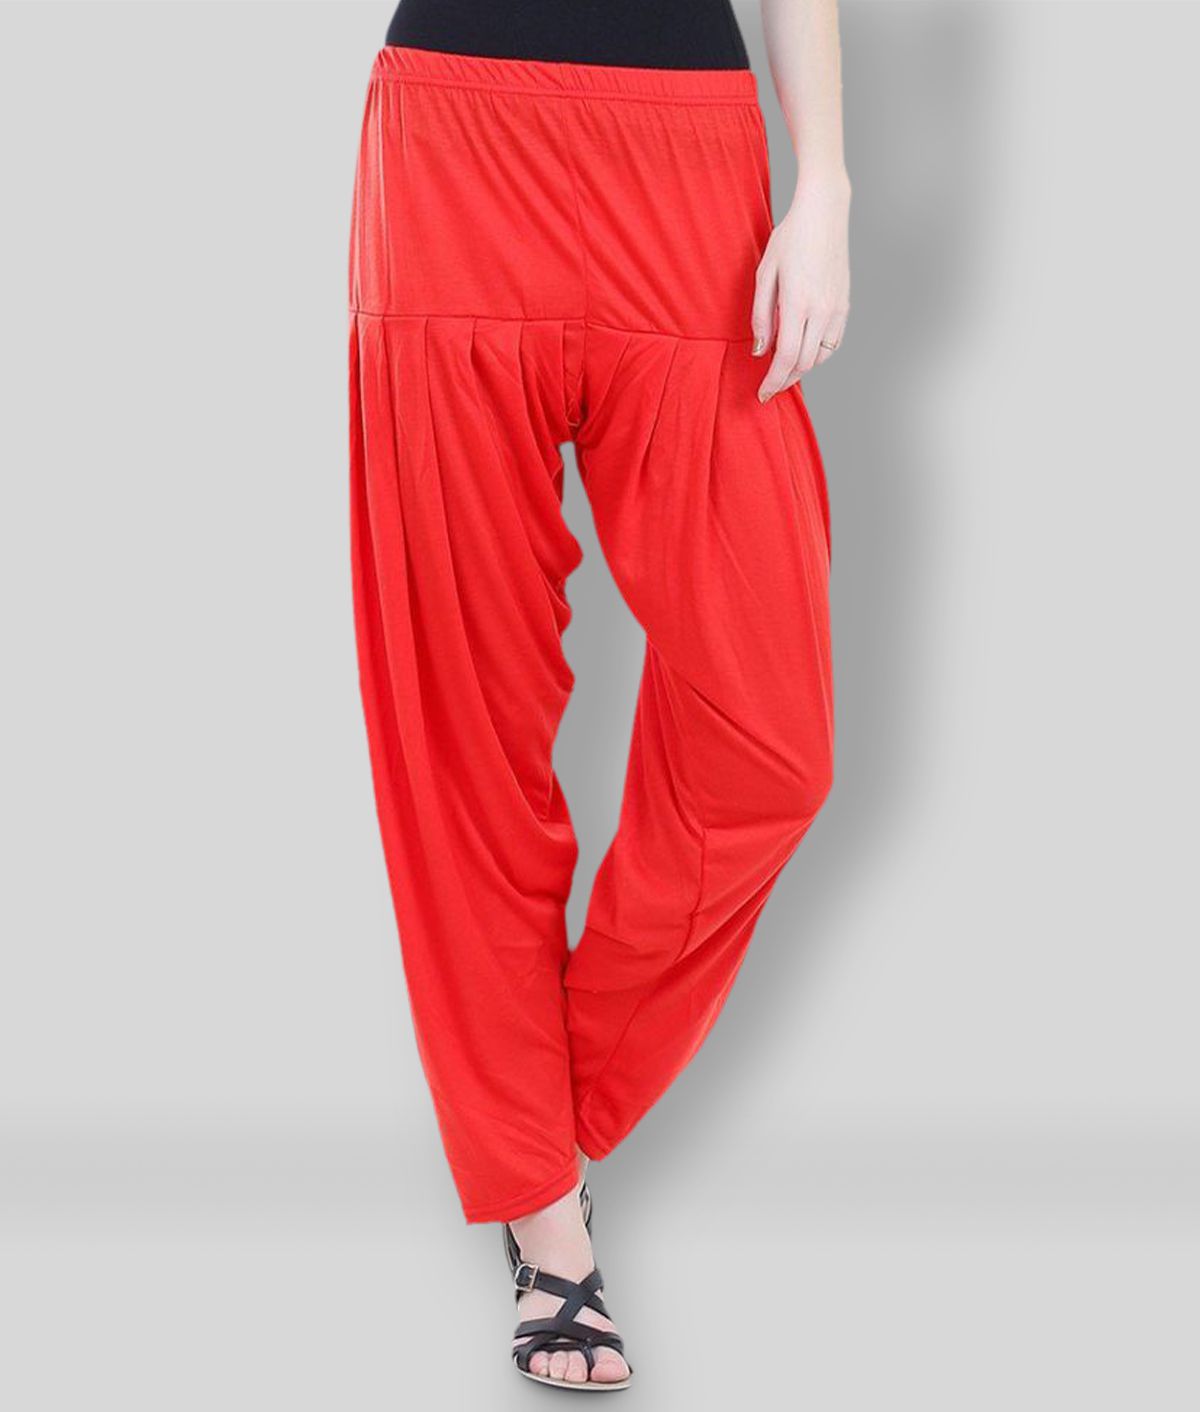     			Colorfly - Red Viscose Loose Women's Harem/Patiala ( Pack of 1 )